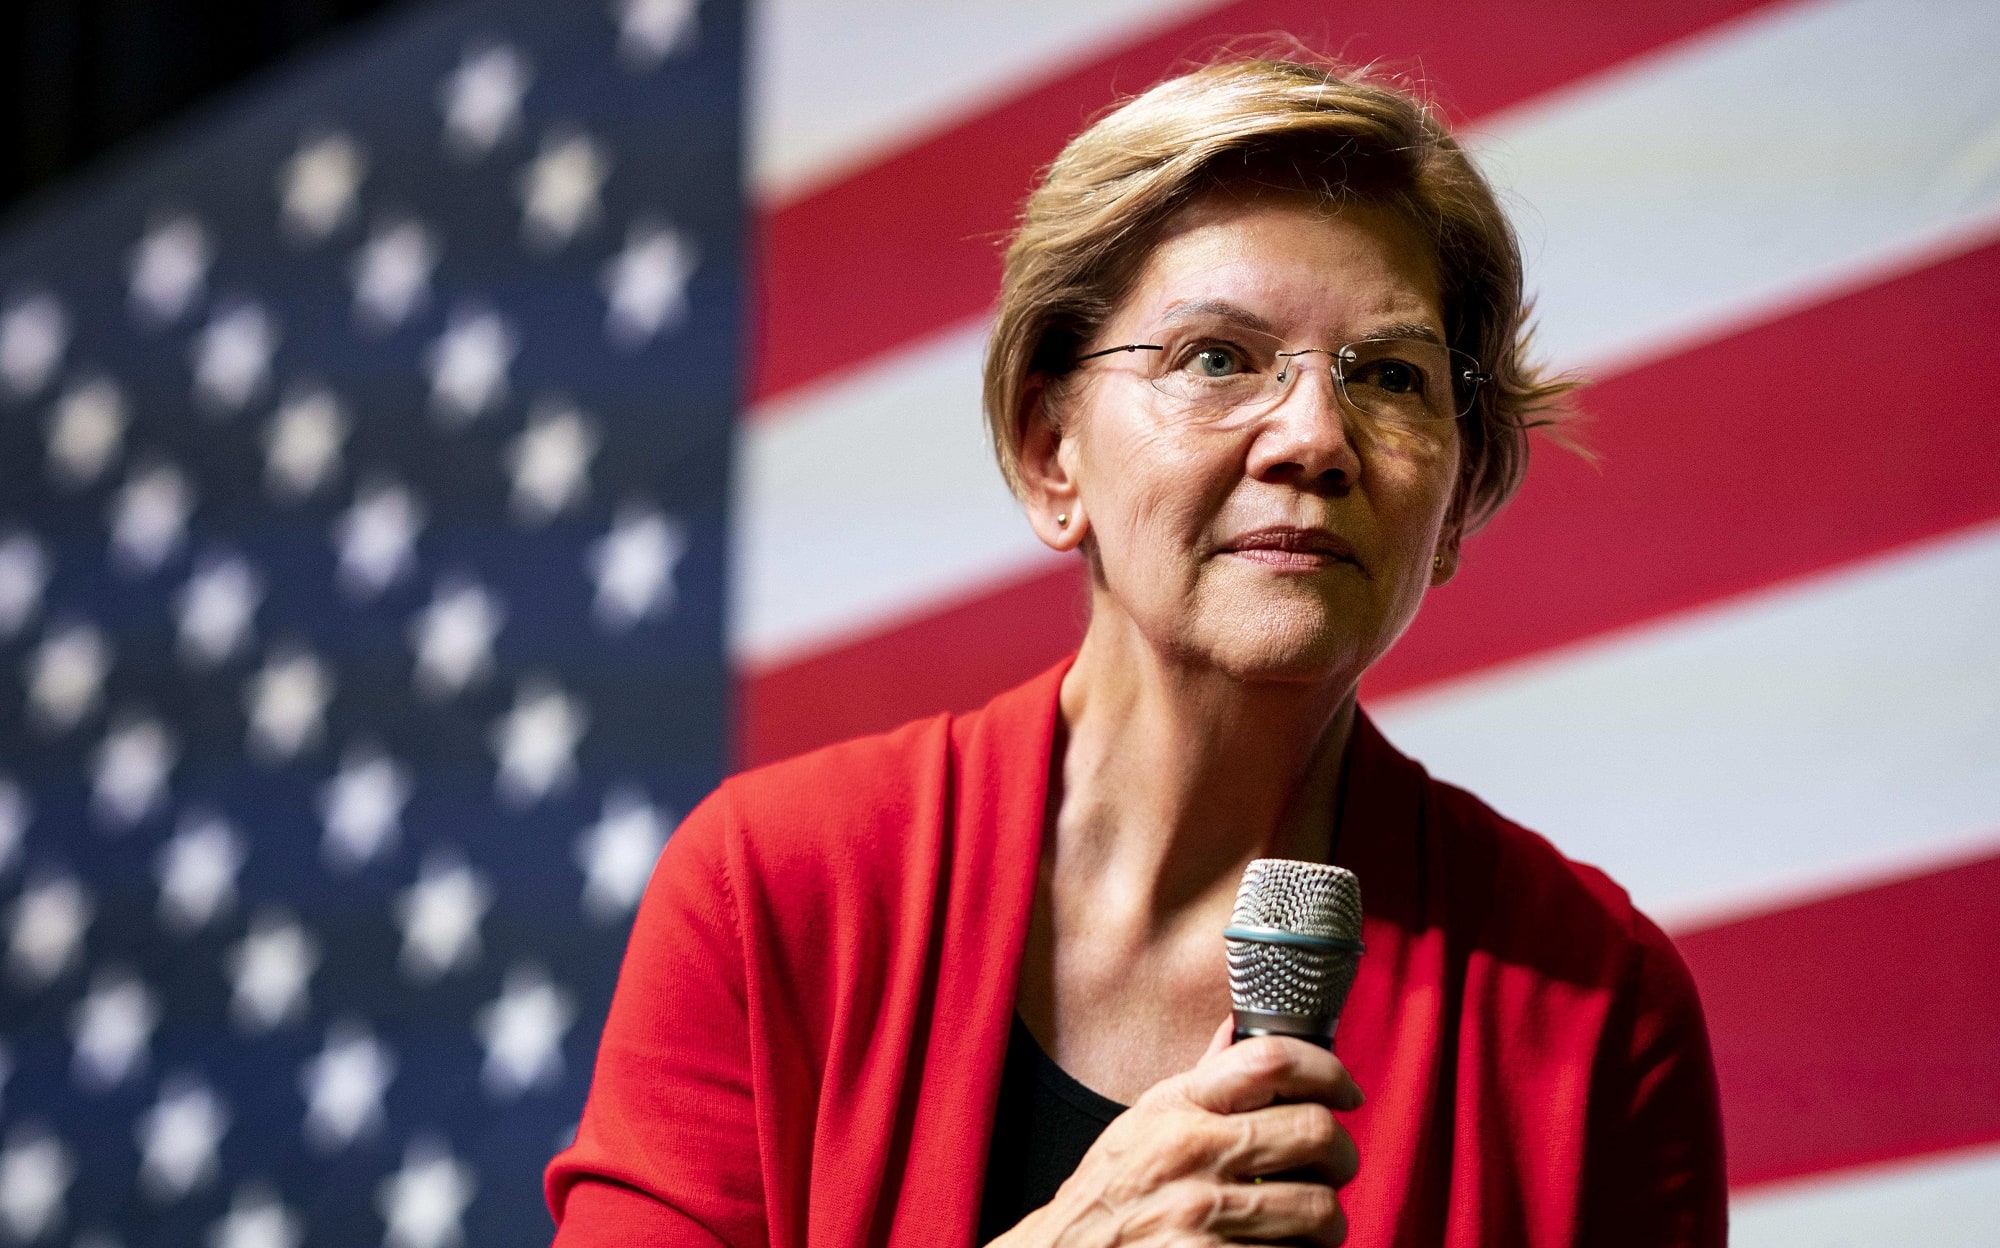 This ETF ought to let you know if Elizabeth Warren has an opportunity in 2020